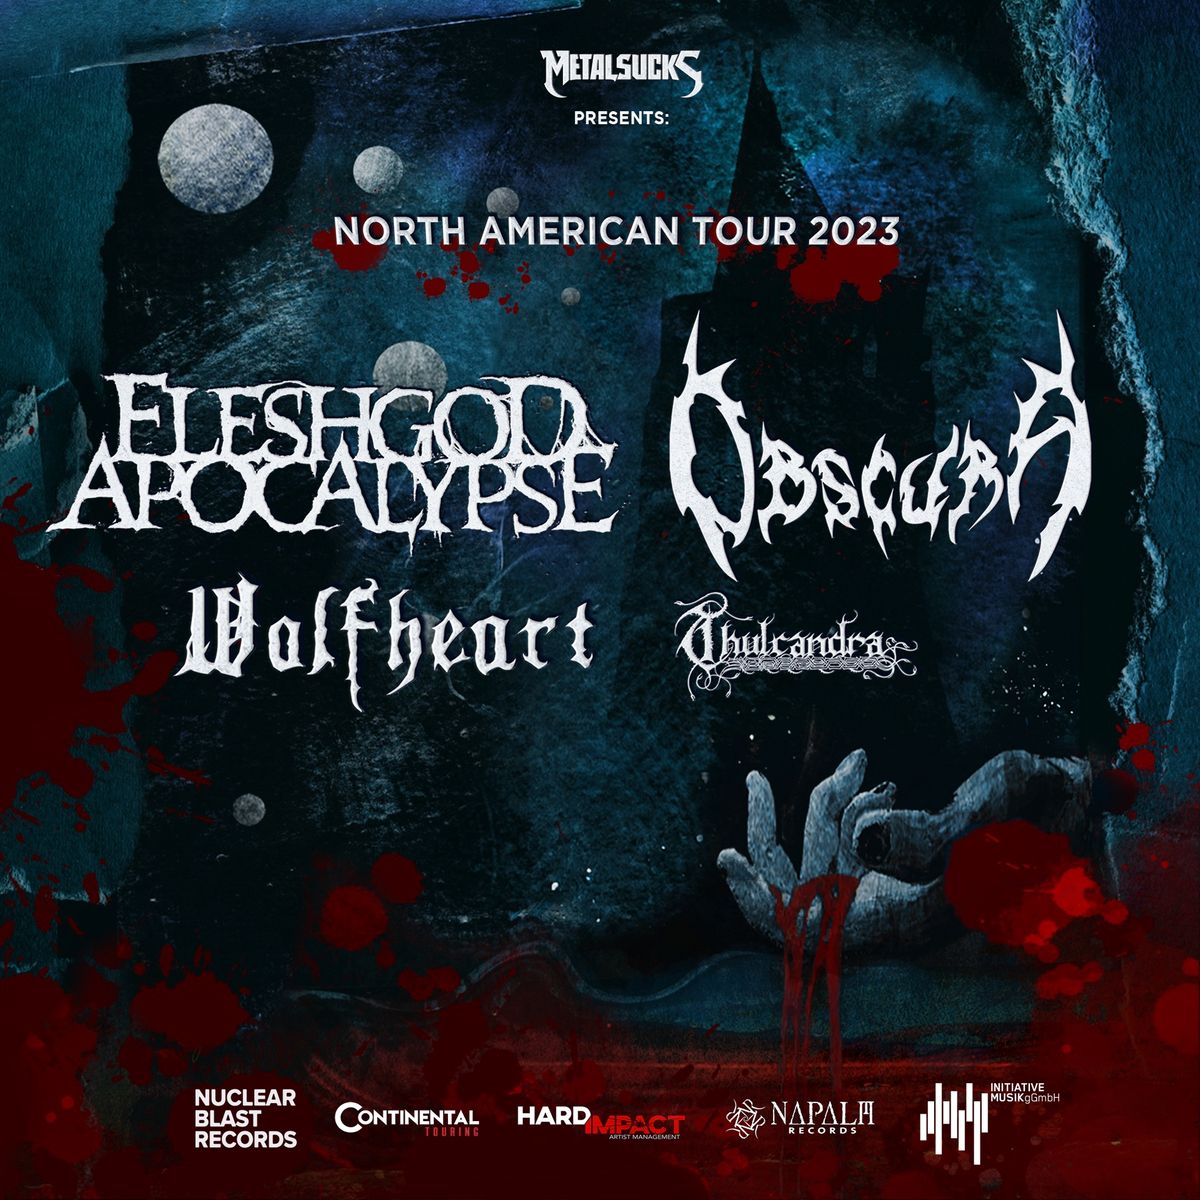 wwwWEB_SQUARE_ADD_DATE_Fleshgod_Obscura_Wolfheart_North_American_Tour_2023_Poster.jpg